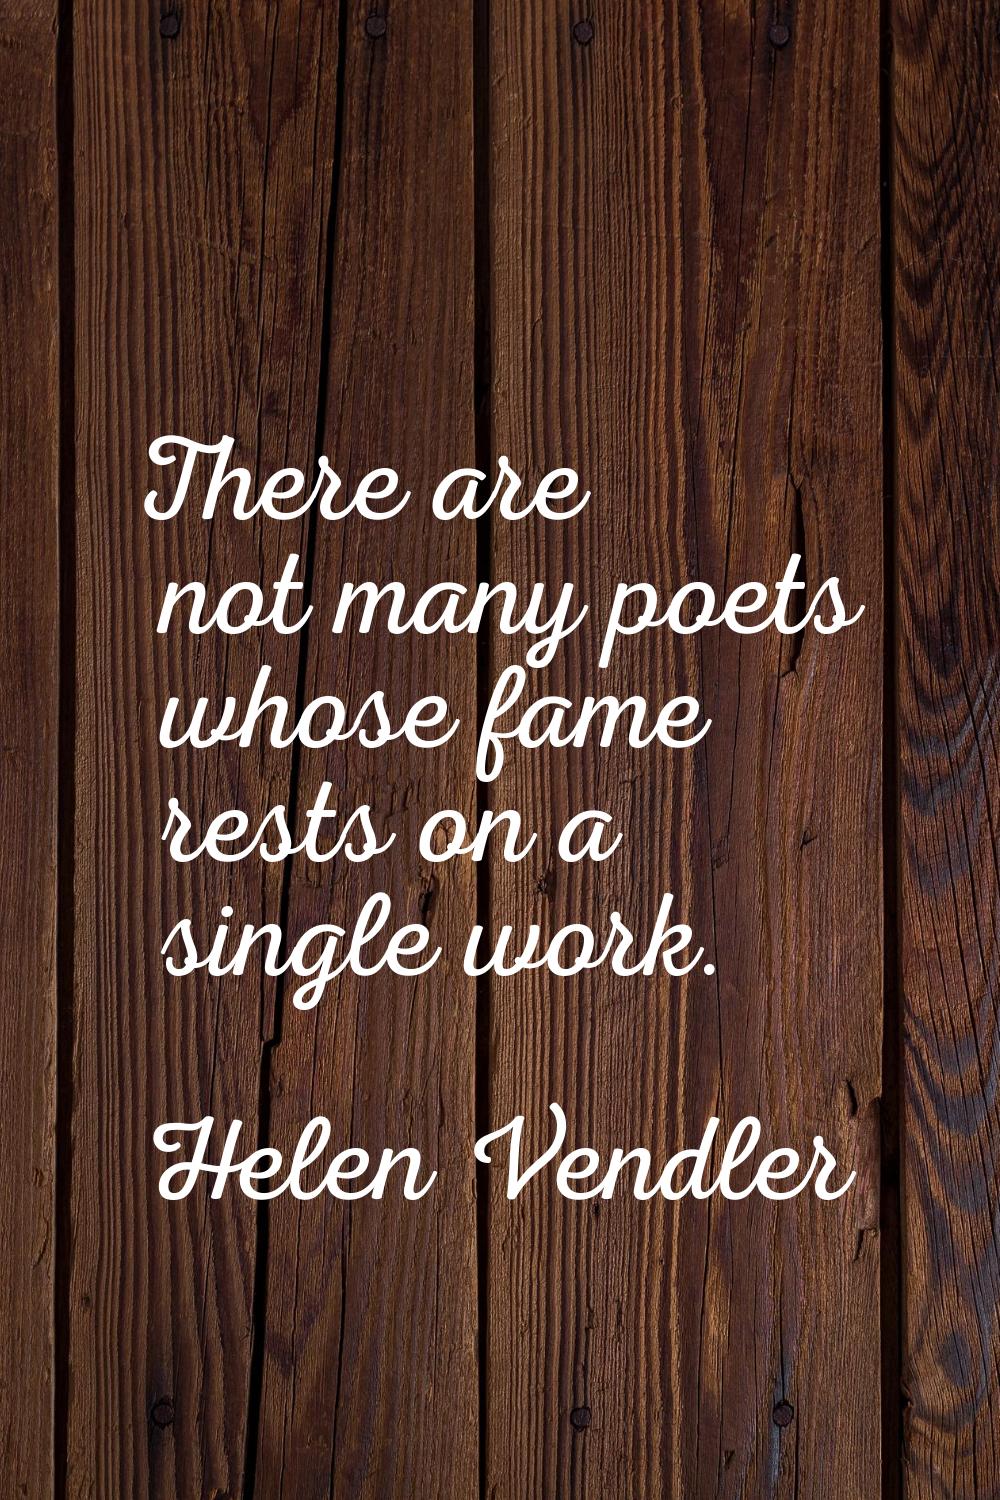 There are not many poets whose fame rests on a single work.